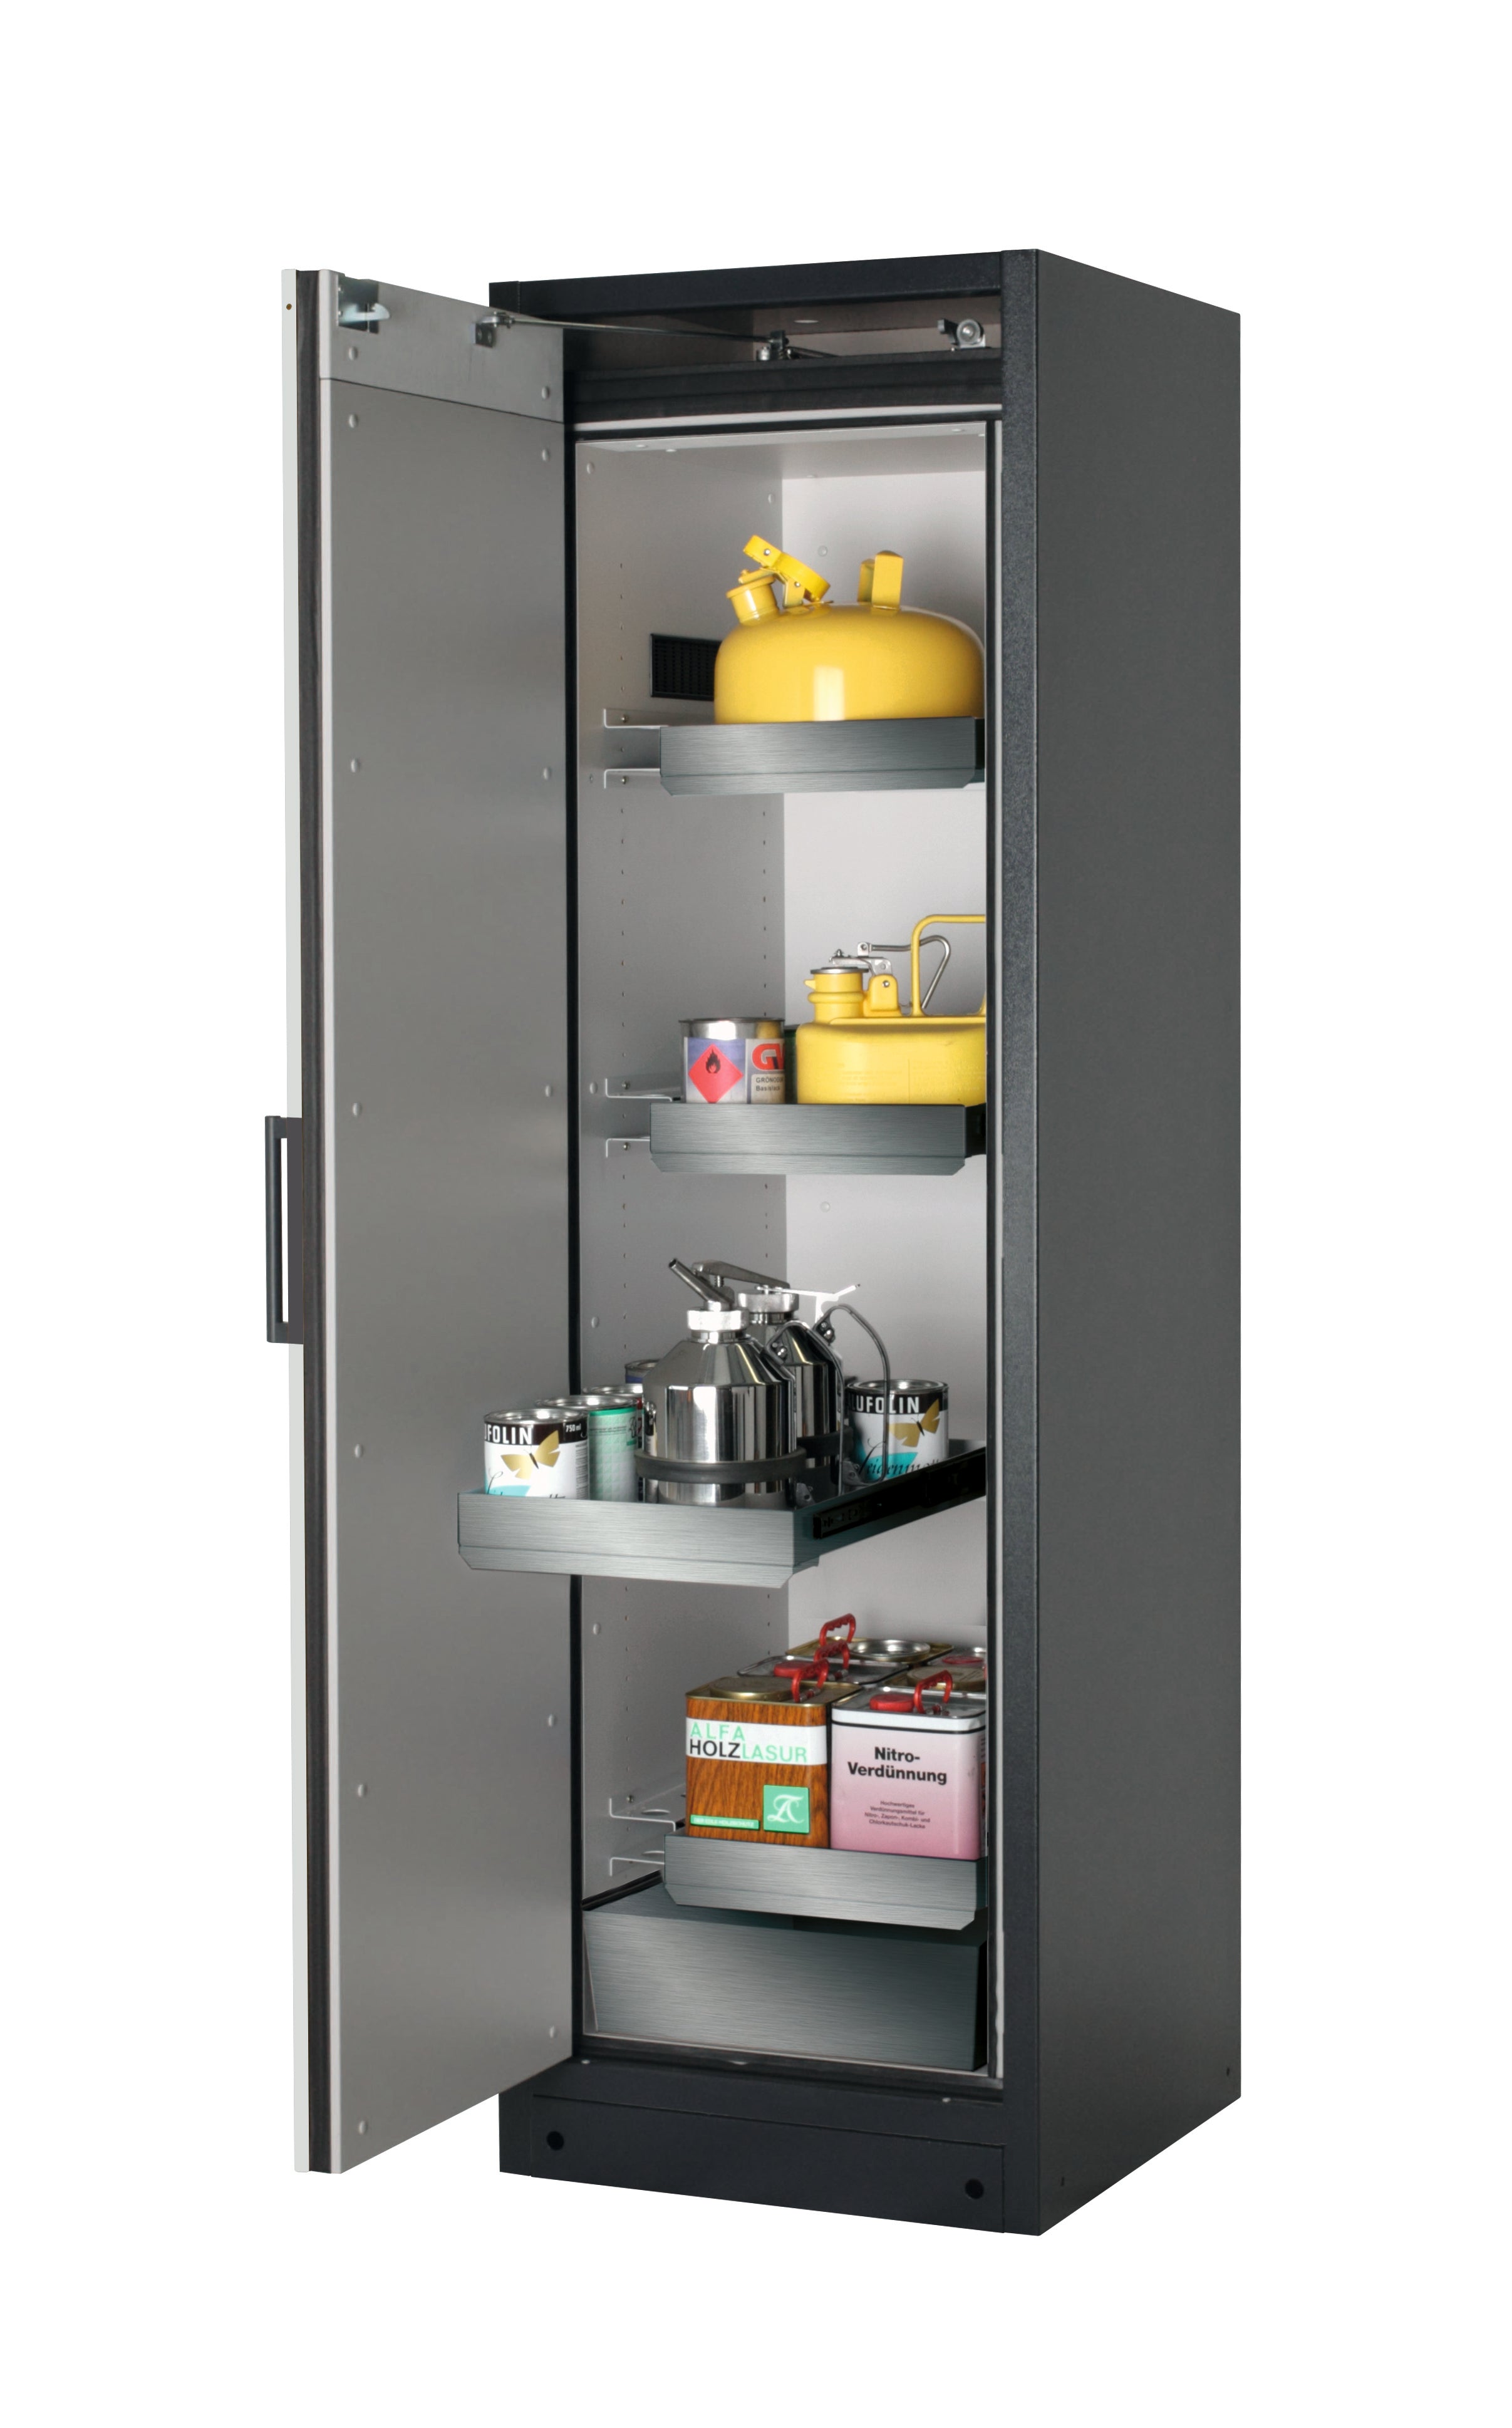 Type 90 safety storage cabinet Q-PEGASUS-90 model Q90.195.060.WDAC in light grey RAL 7035 with 3x drawer (standard) (stainless steel 1.4301),